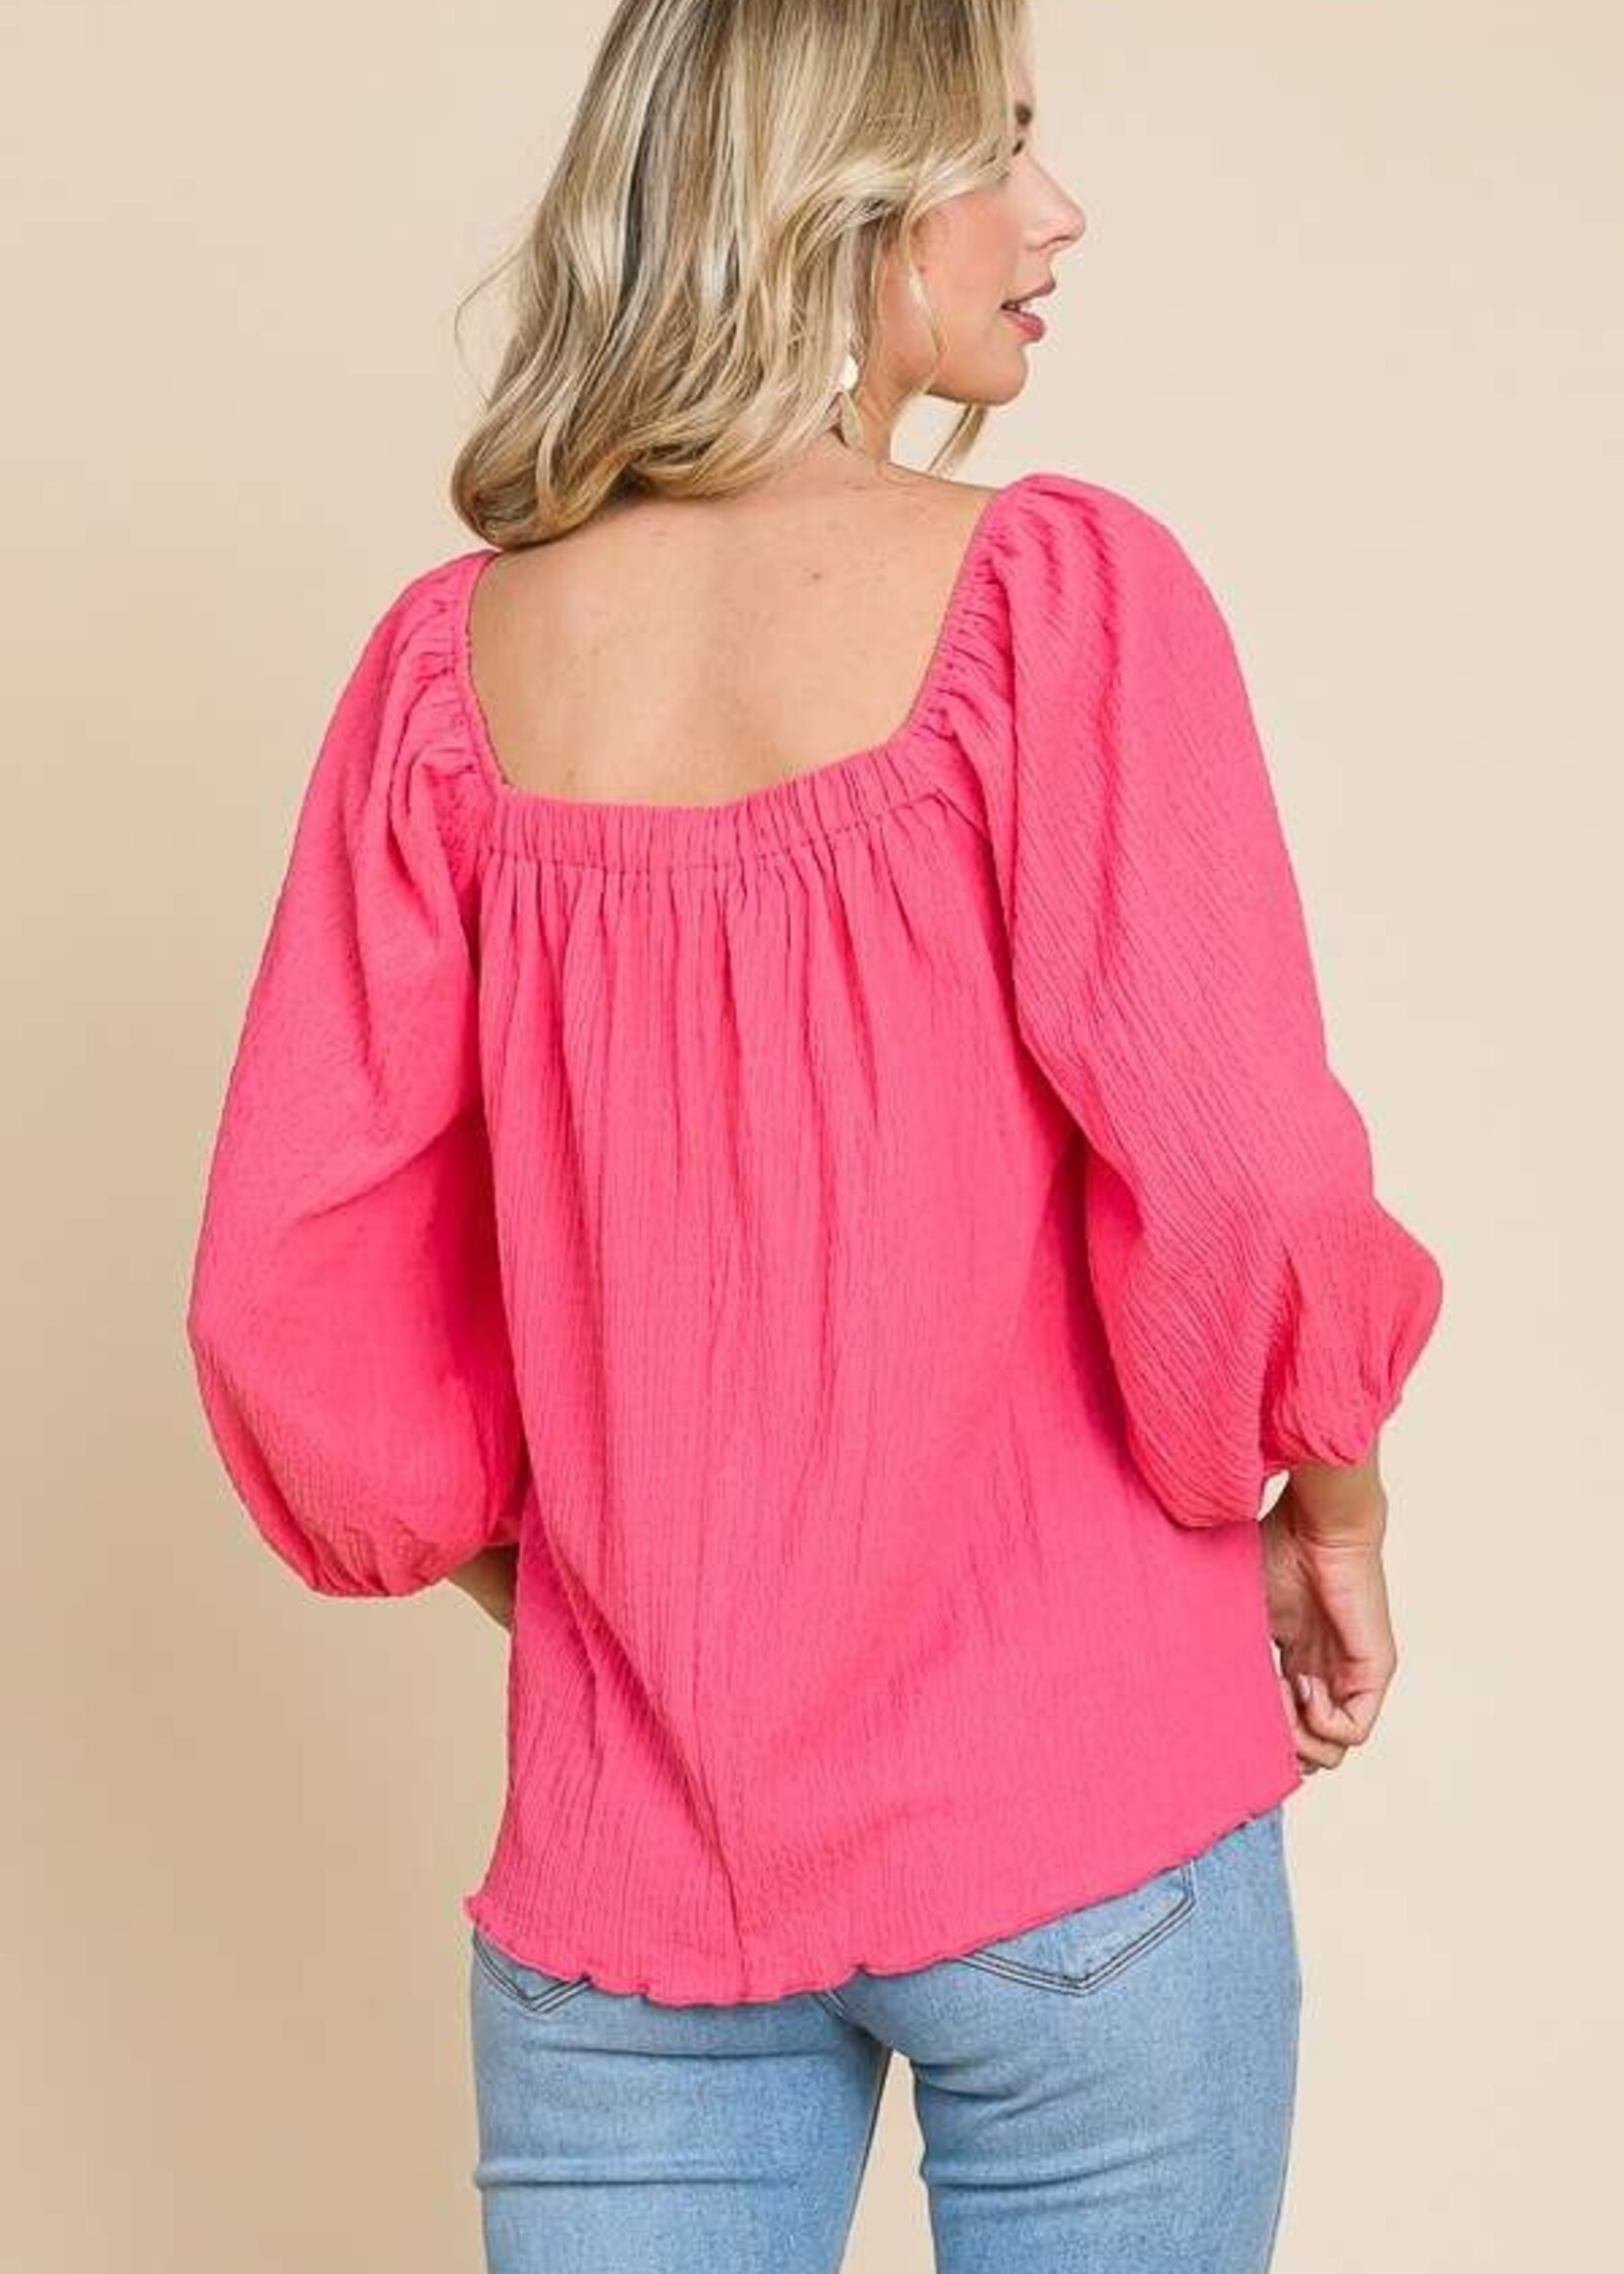 Hot Pink Flowy Top